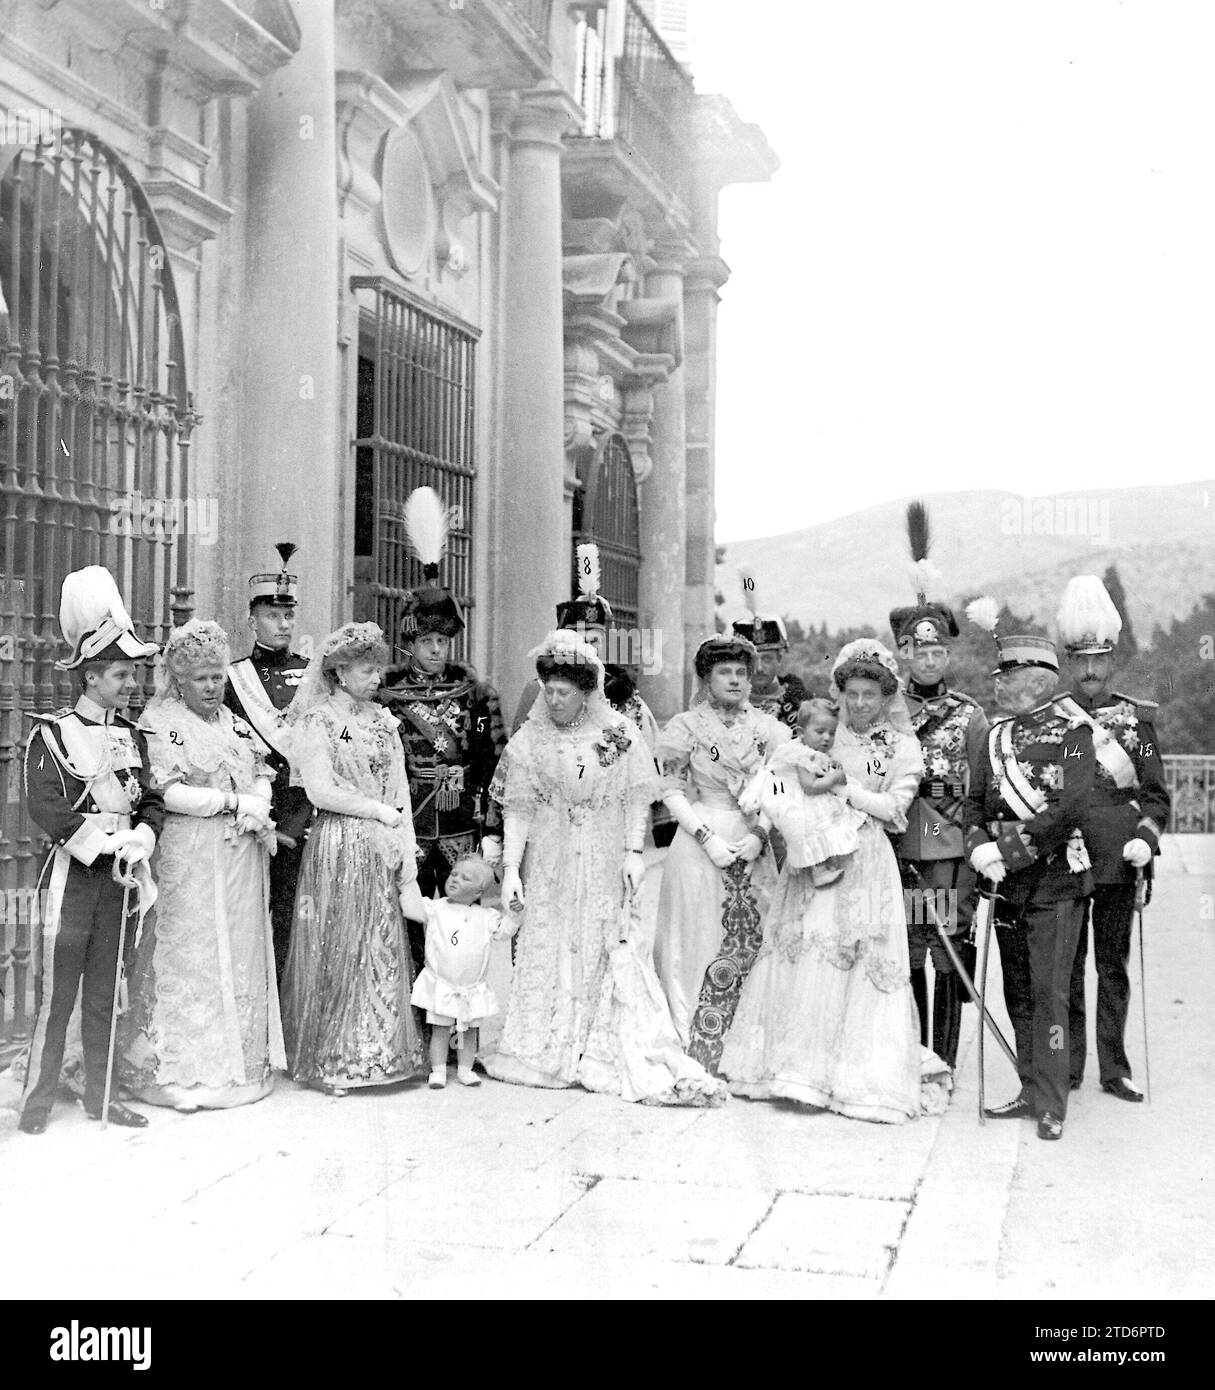 06/01/1909. In the farm. After the baptism of Infantita Beatriz. The royal family on a Palace terrace. (1) the infante Don Luis de Orleans; (2) the Infanta Doña Isabel; (3) the infante Don Alfonso de Orleans; (4) the Queen Mother, Mrs. María Cristina; (5) HM the King; (6) the prince of Asturias; (7) Princess Beatrice of Wattemberg; (8) the infant Don Rainiero de Borbón; (9) the Infanta Doña Eulalia; (10) the infante Don Felipe de Borbón; (11) the infant Don Jaime; (12) the Infanta Doña María Teresa; (13) the infante Don Fernando; (14) Archduke Frederick; (15) the infant Don Carlos. Credit: Alb Stock Photo